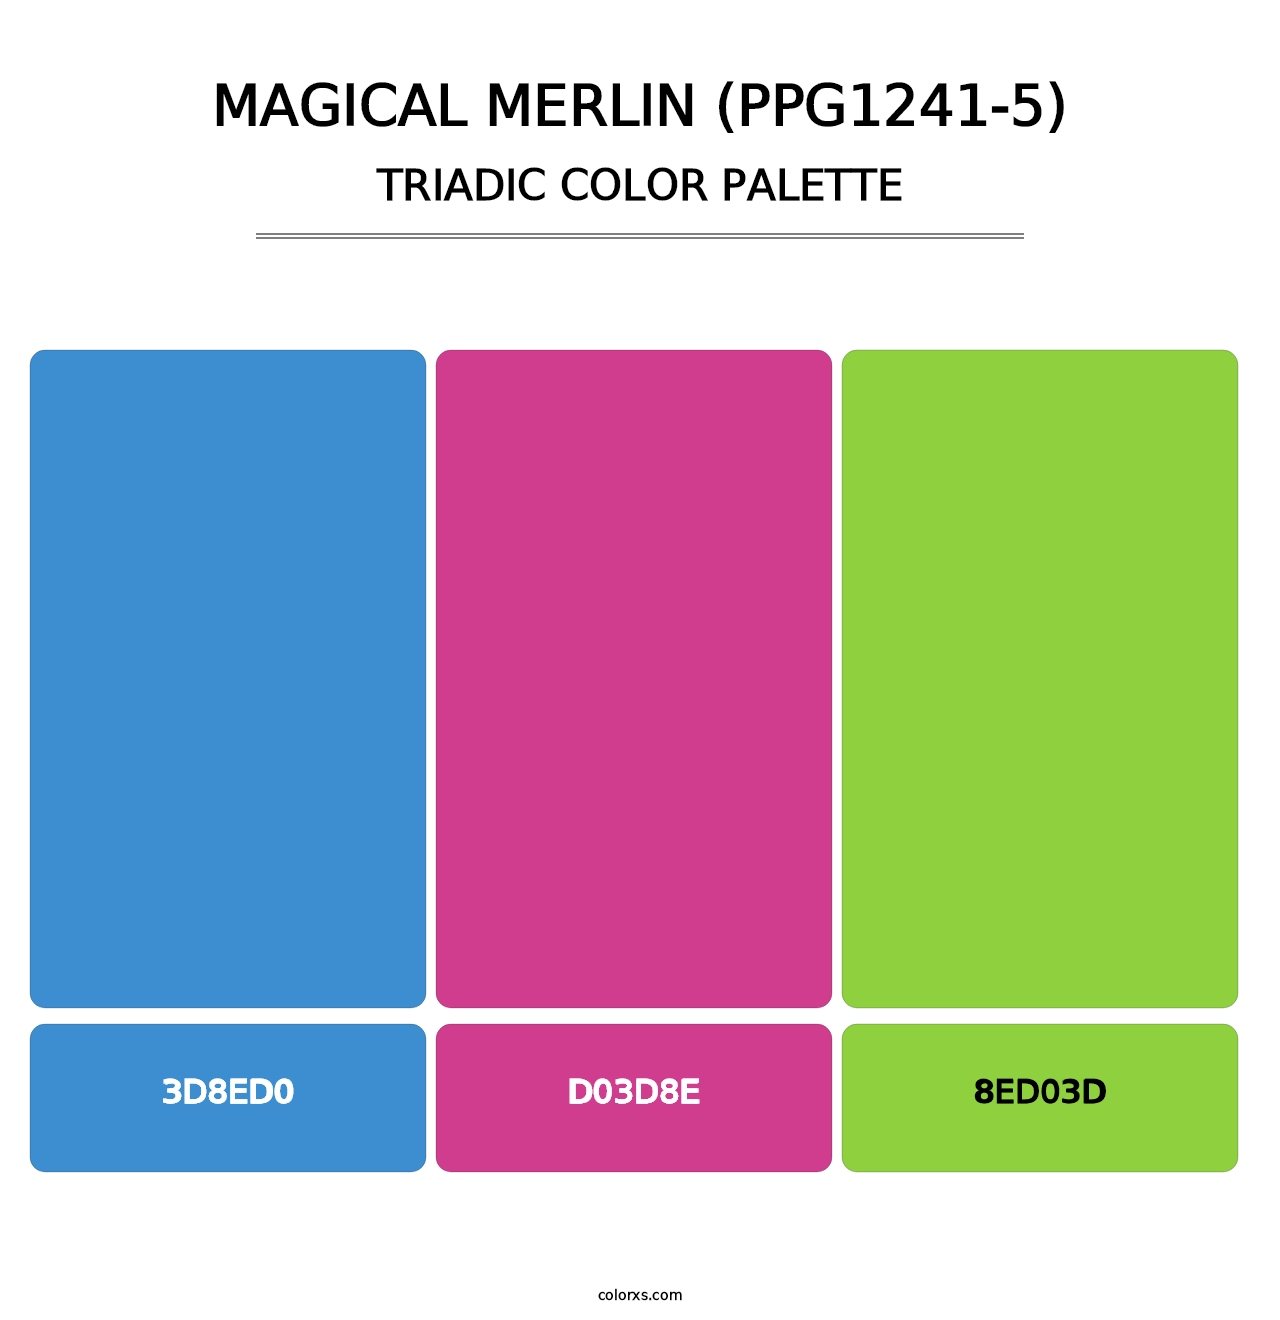 Magical Merlin (PPG1241-5) - Triadic Color Palette